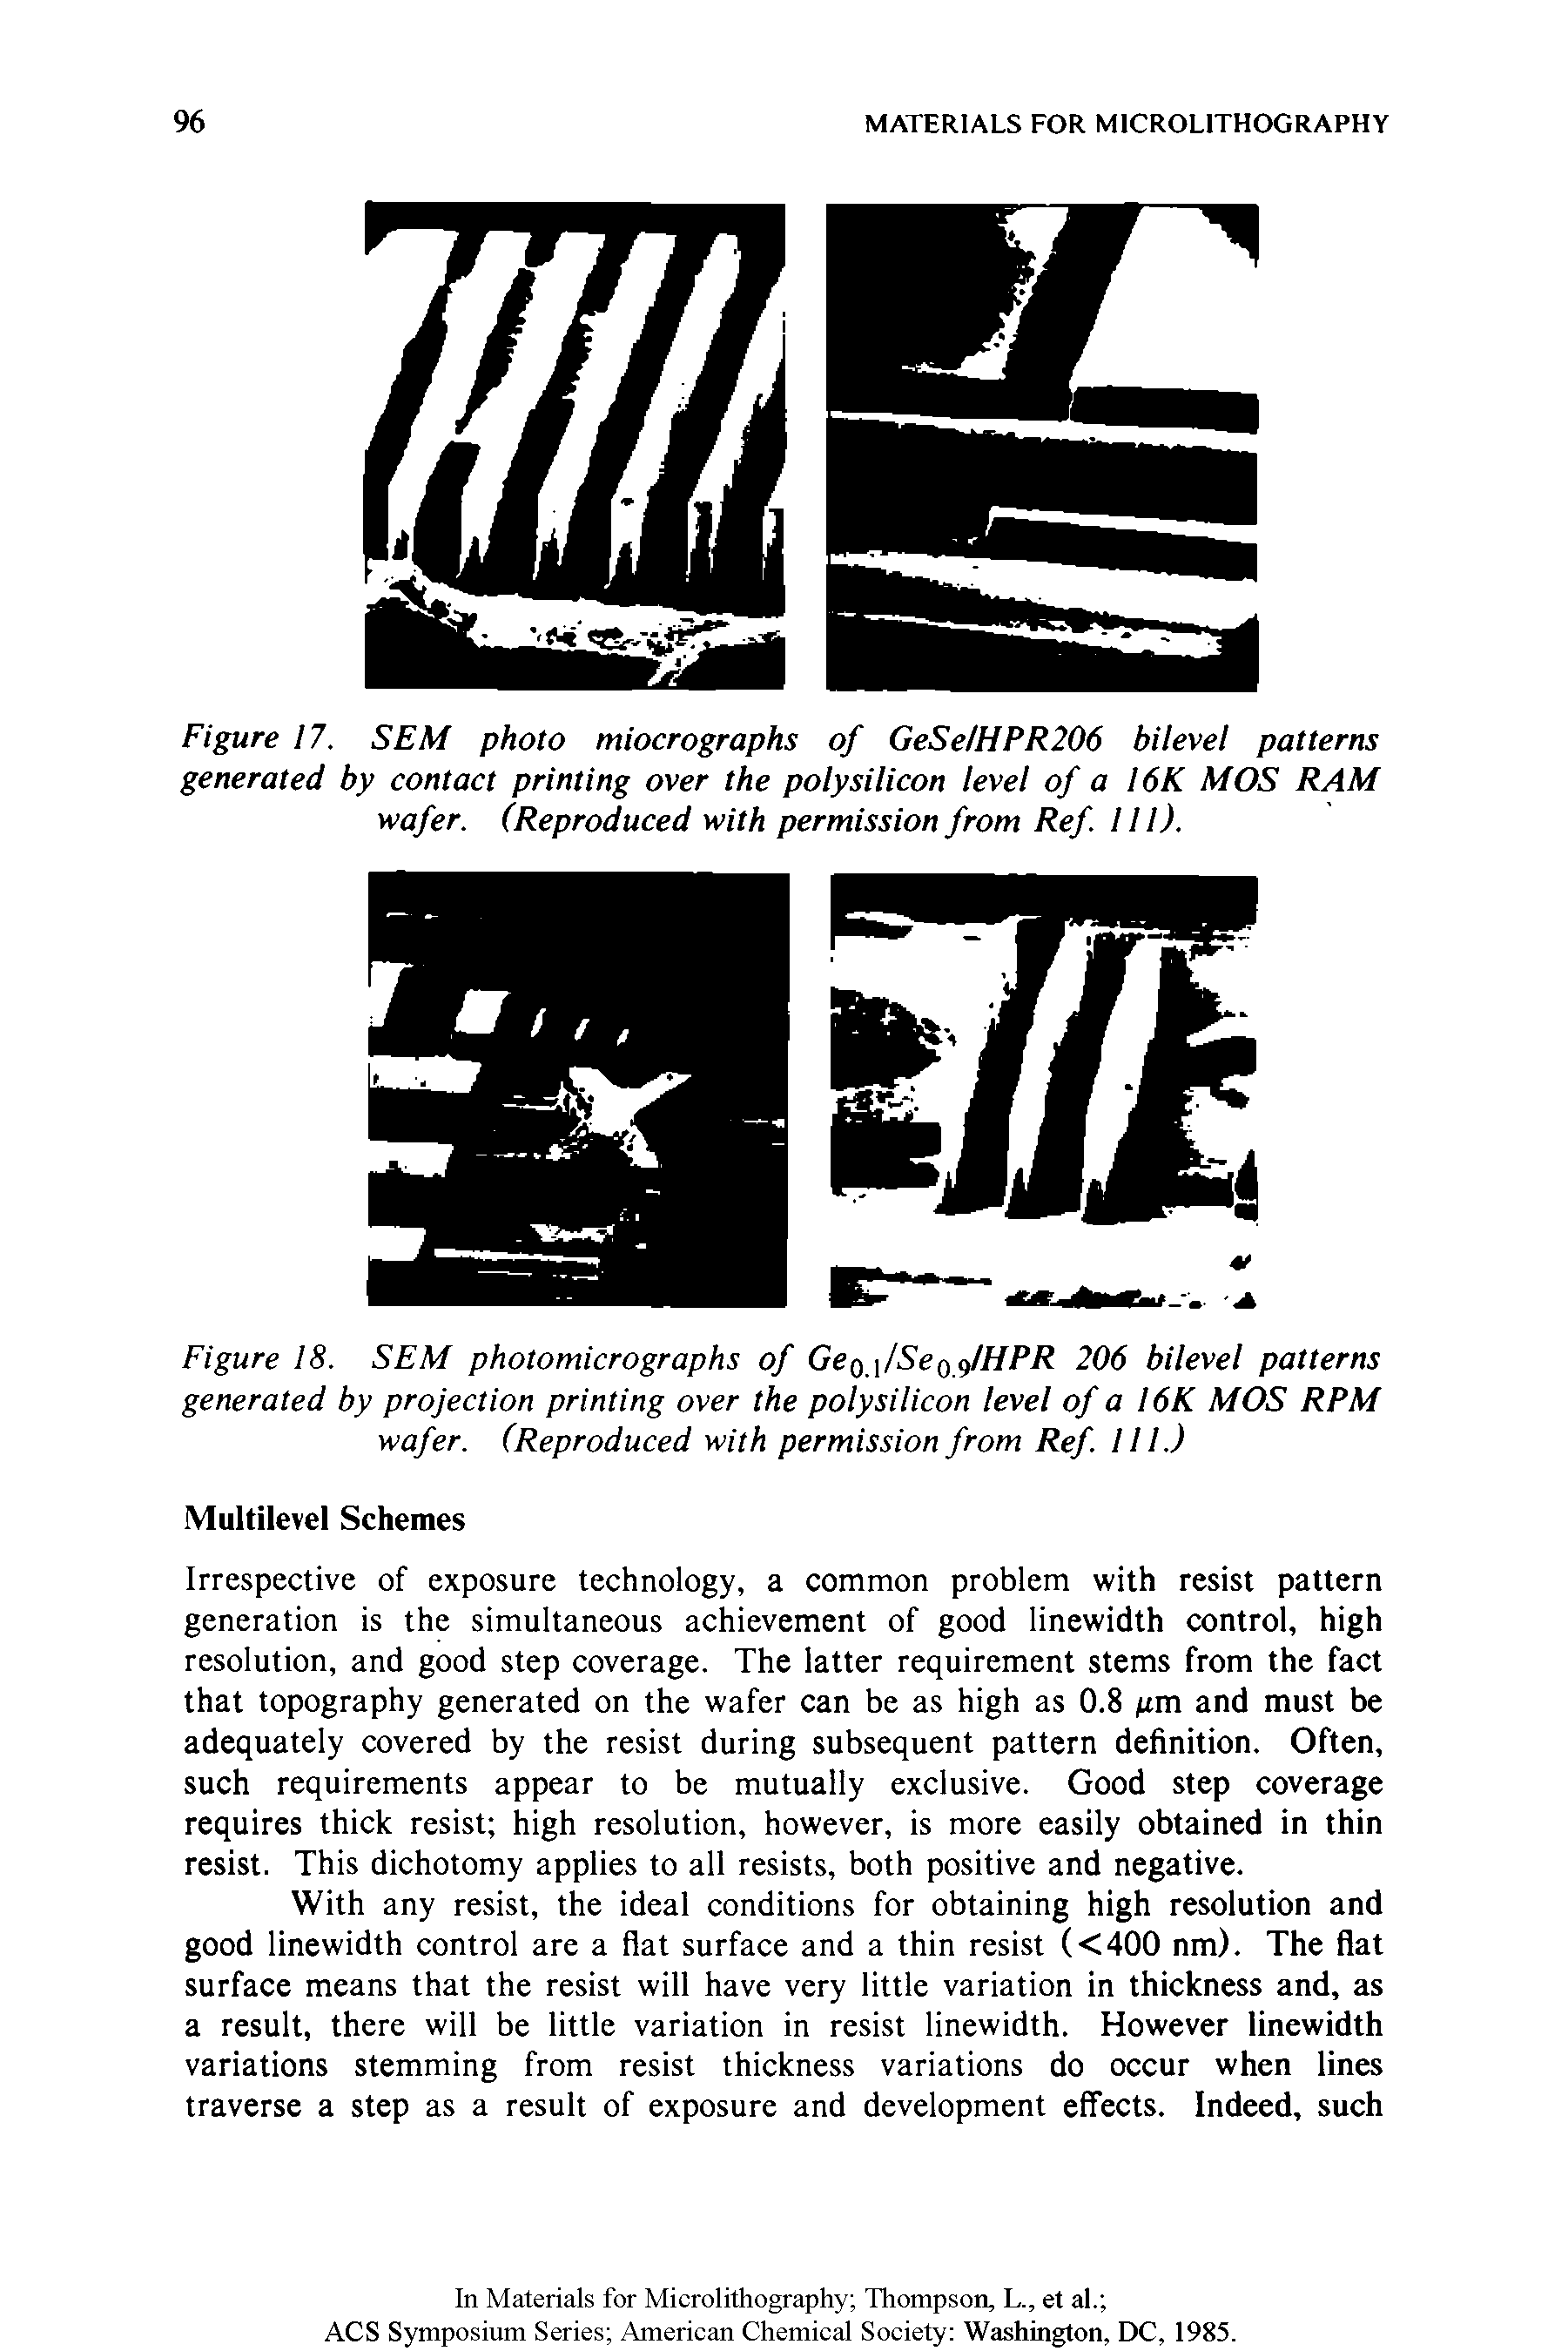 Figure 17. SEM photo miocrographs of GeSe/HPR206 bilevel patterns generated by contact printing over the poly silicon level of a 16K MOS RAM wafer. (Reproduced with permission from Ref. III).